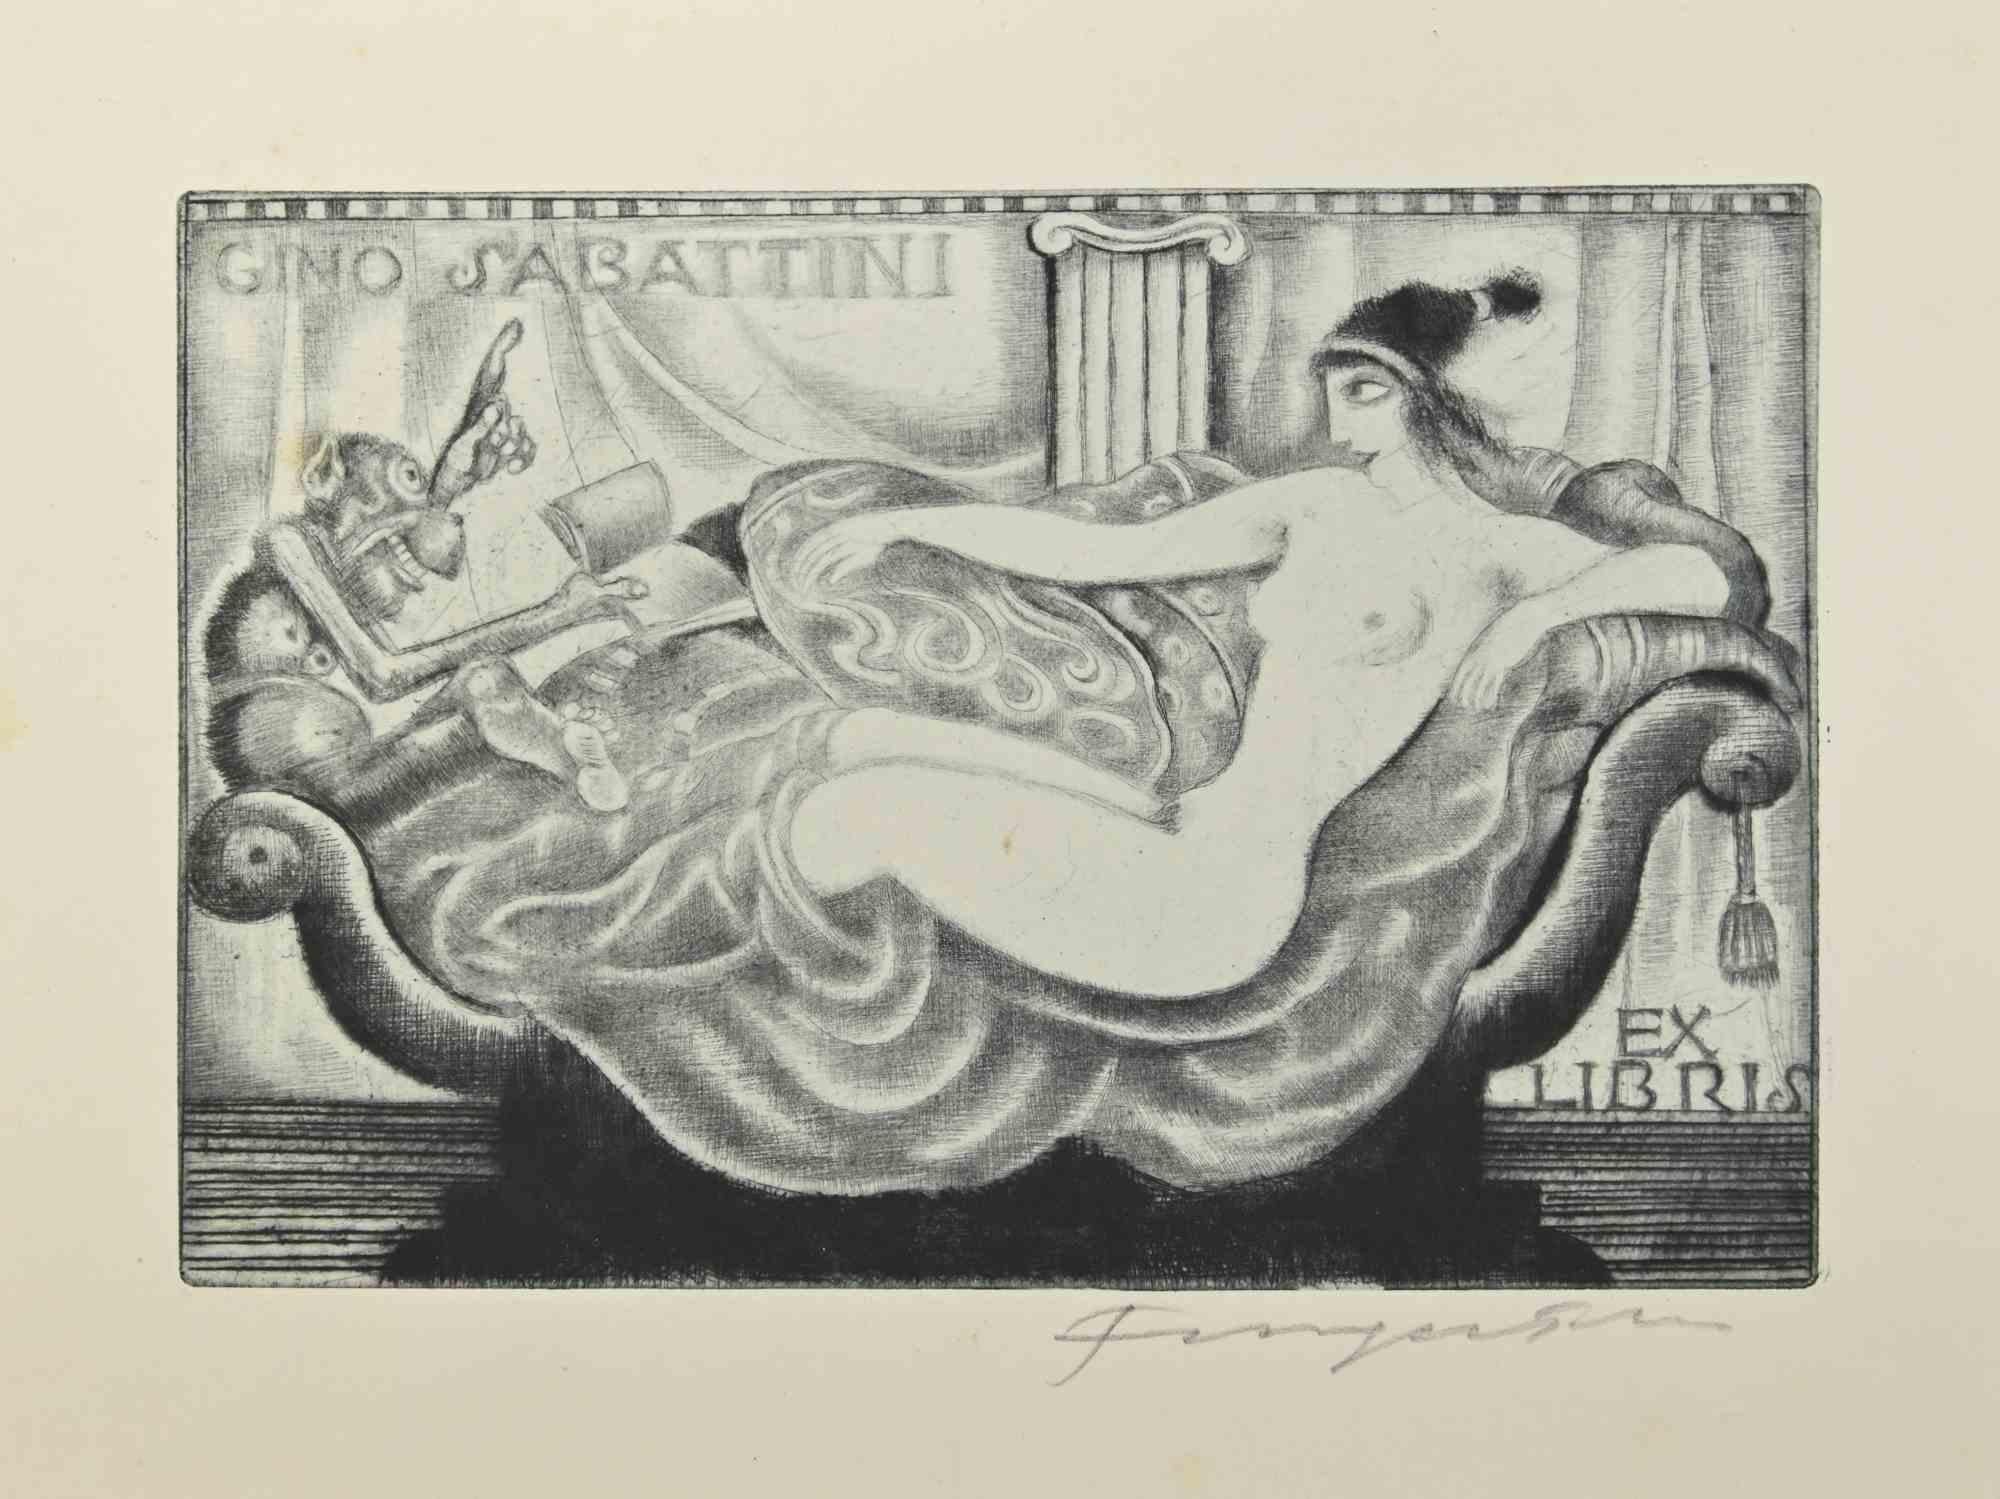 Ex Libris - Gino Sabattini is an Etching print created by  Michel Fingesten.
Hand Signed in  the lower right margin.
Good conditions except some foxings that doesn't affect the image.

Michel Fingesten (1884 - 1943) was a Czech painter and engraver